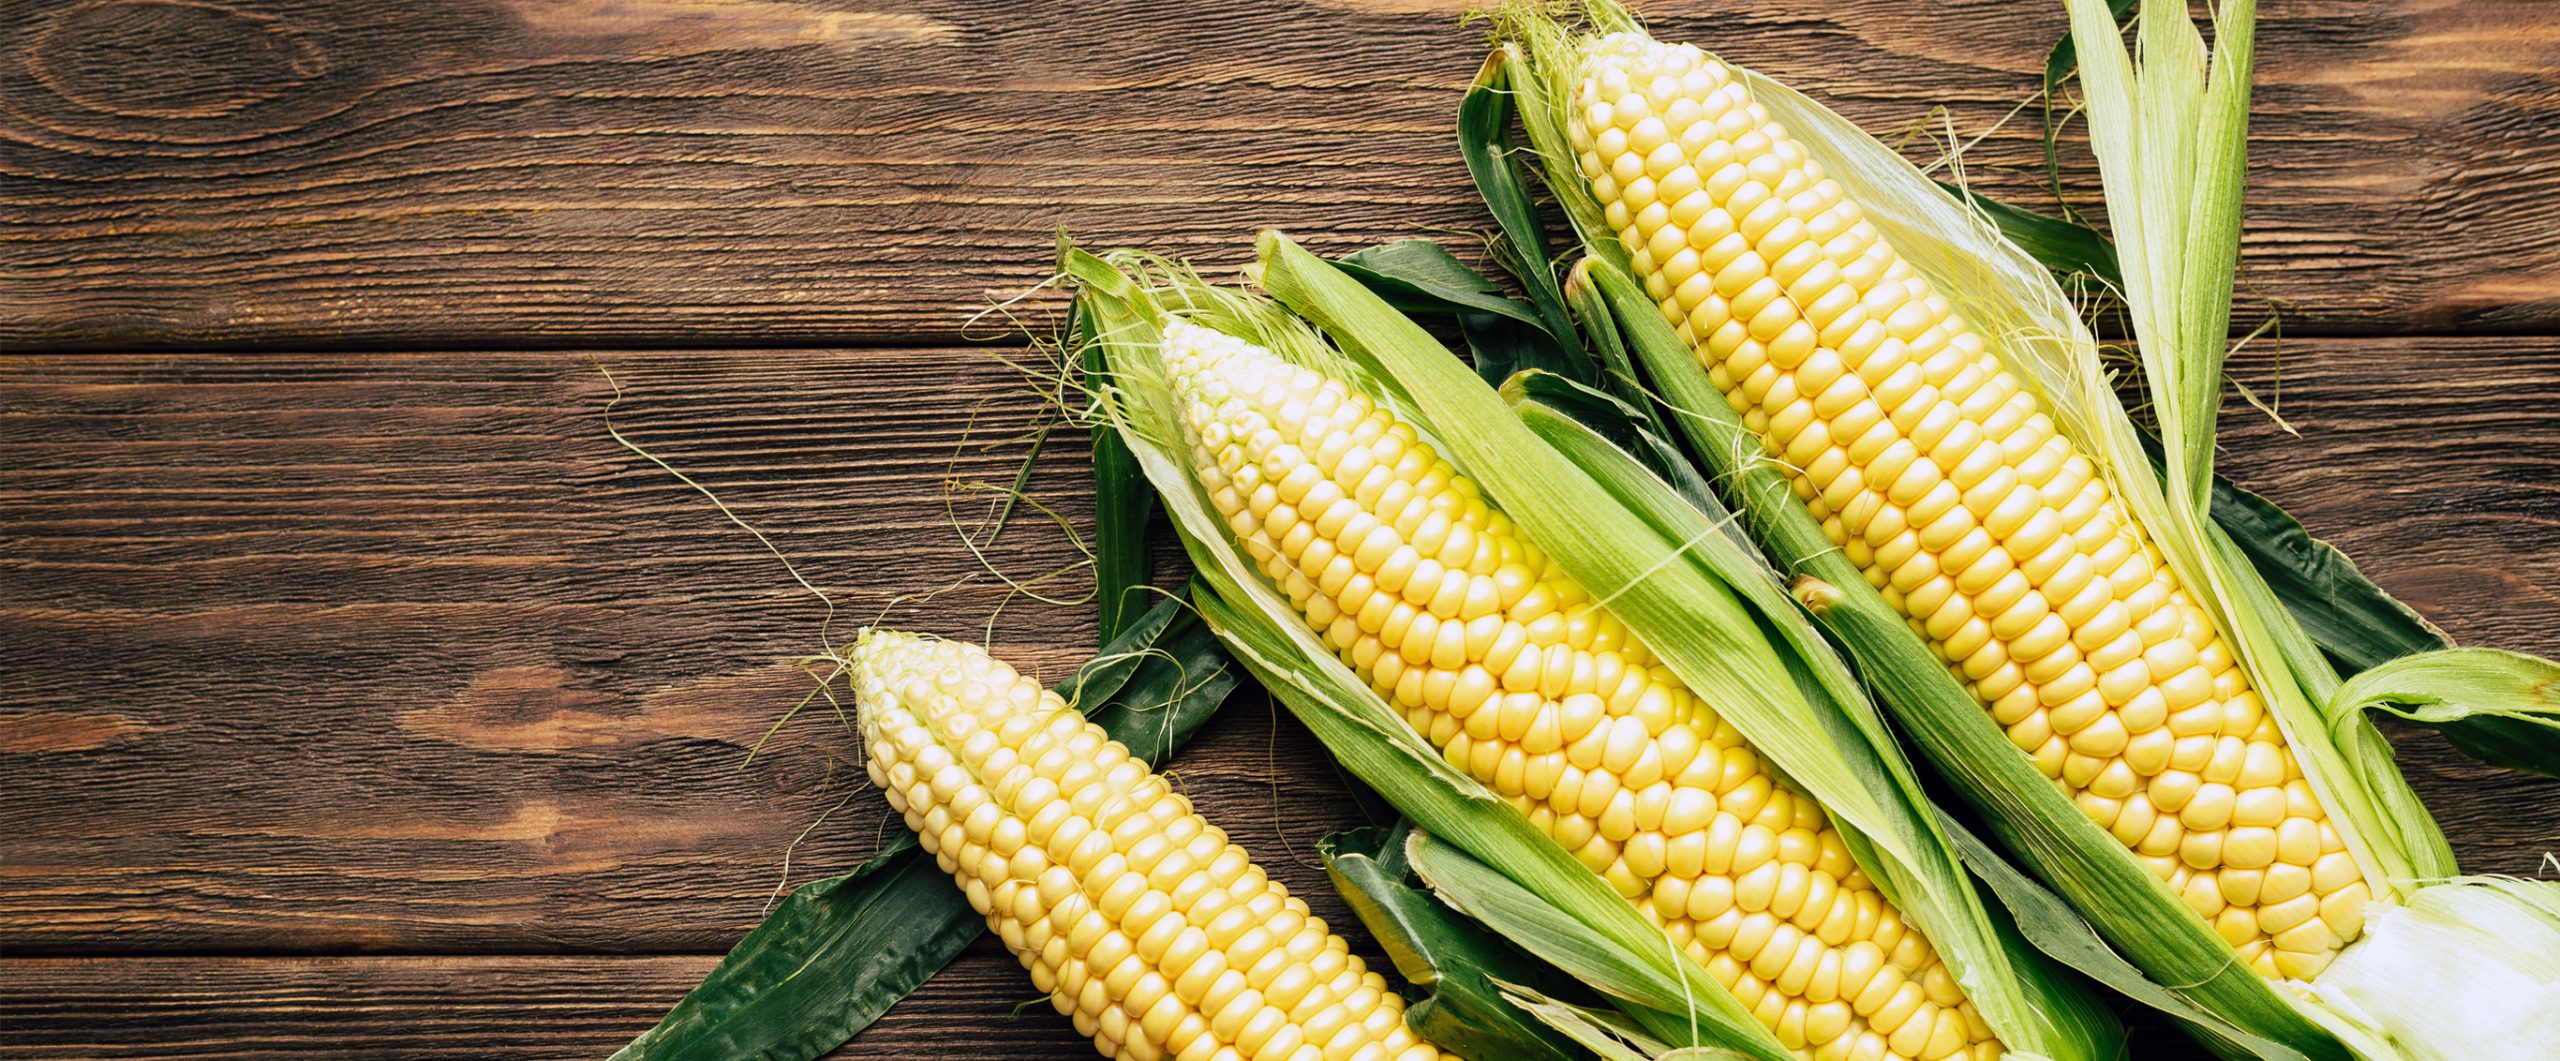 what do corn symbolize in the bible